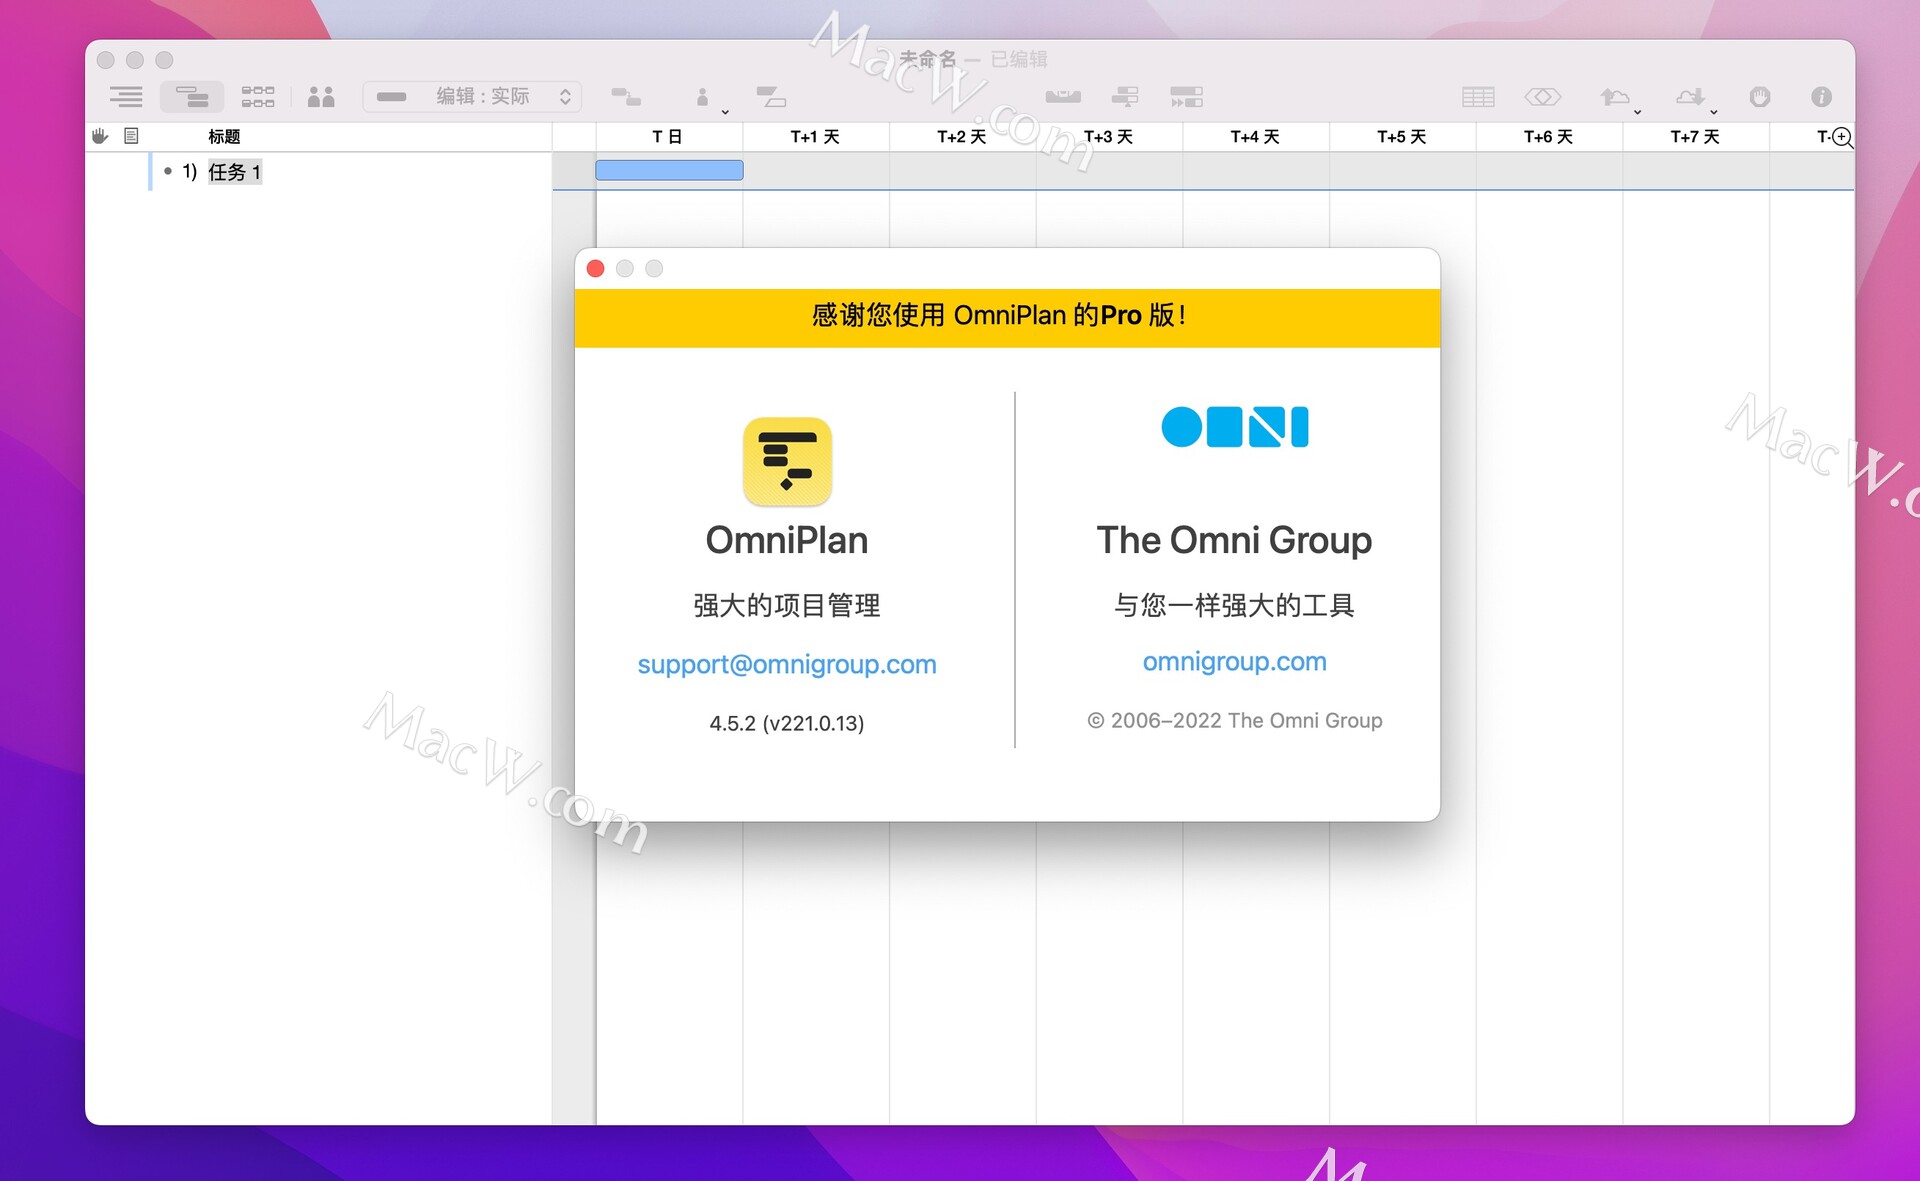 download the new OmniPlan Pro 4